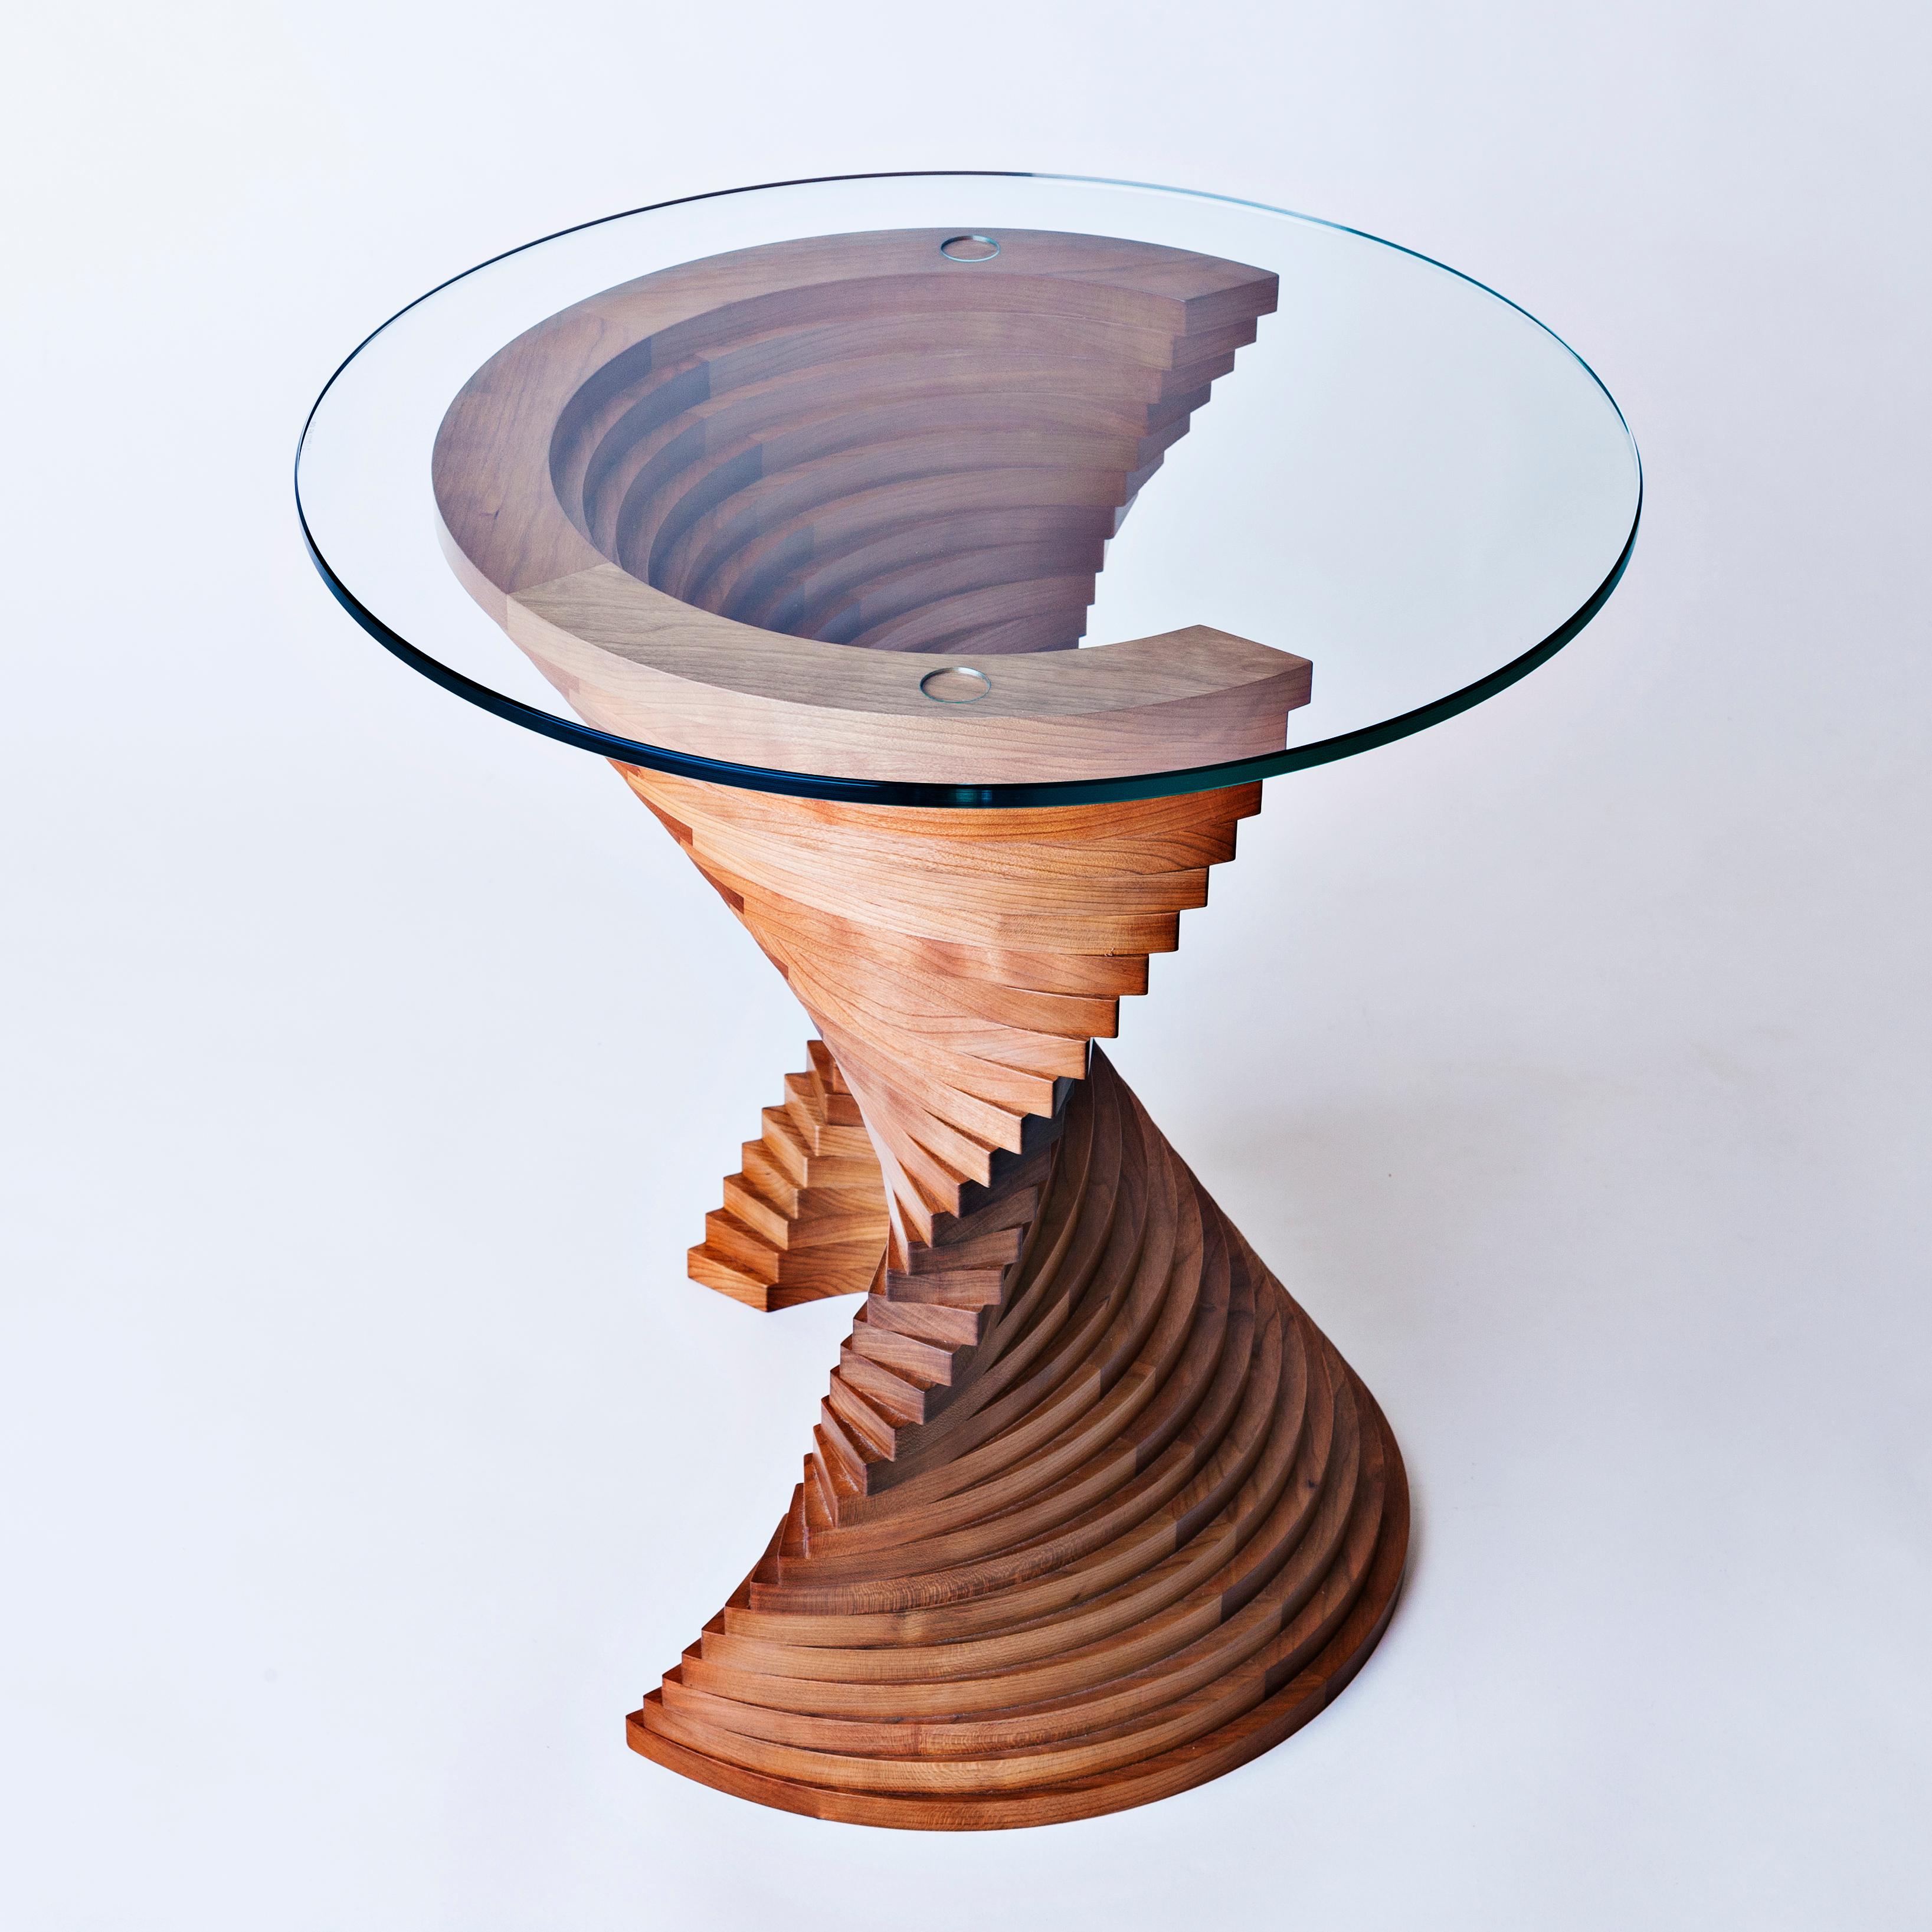 Aguaviva side table by David Tragen
Limited Edition of 12
Dimensions: W 52 x D 52 x H 54 cm
Materials: American Walnut
Also available in American Cherry

The concept behind Into the Abyss, was the disintegration of matter as it enters a black